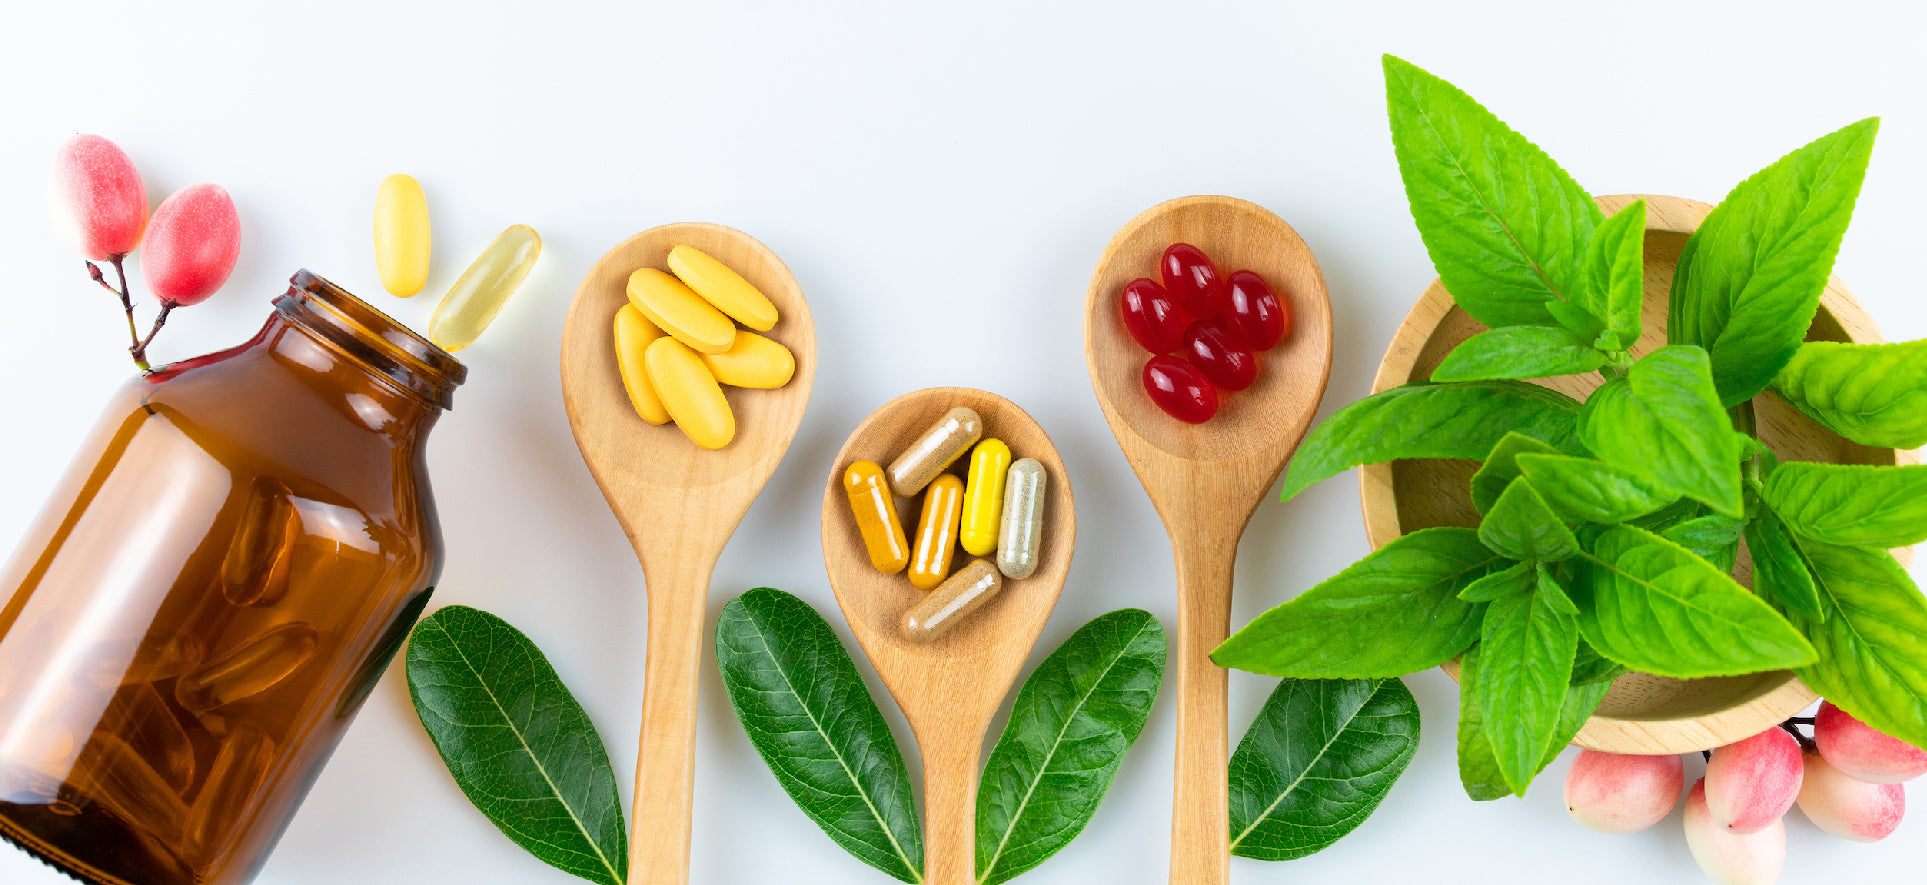 Multivitamins and Beauty